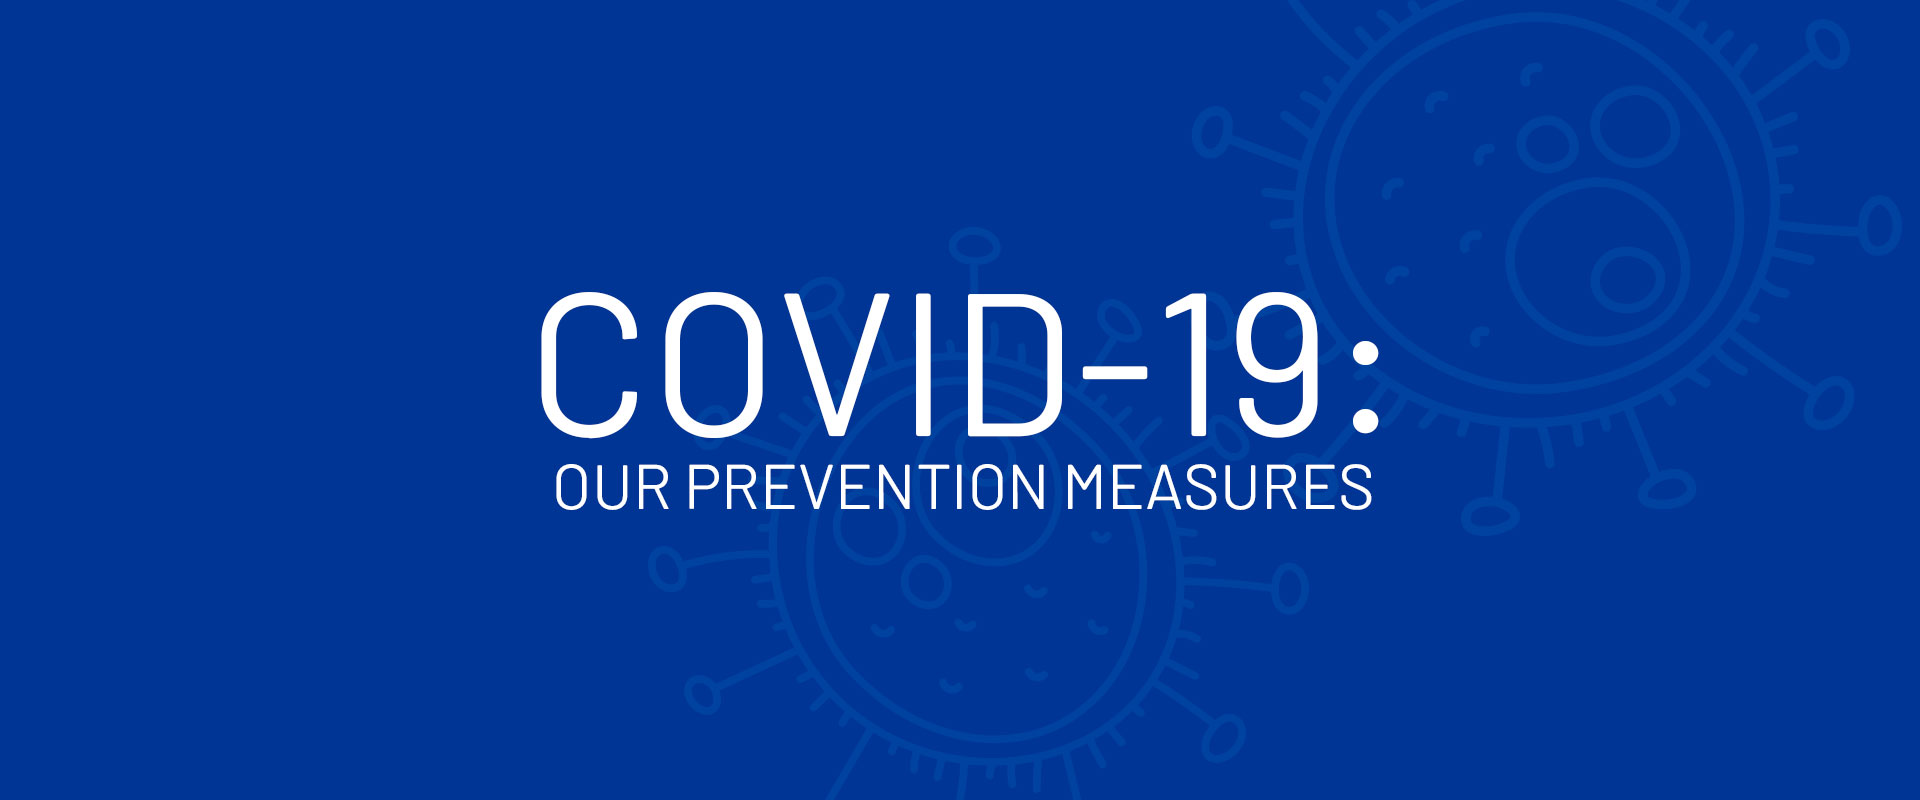 COVID-19: our prevention measures